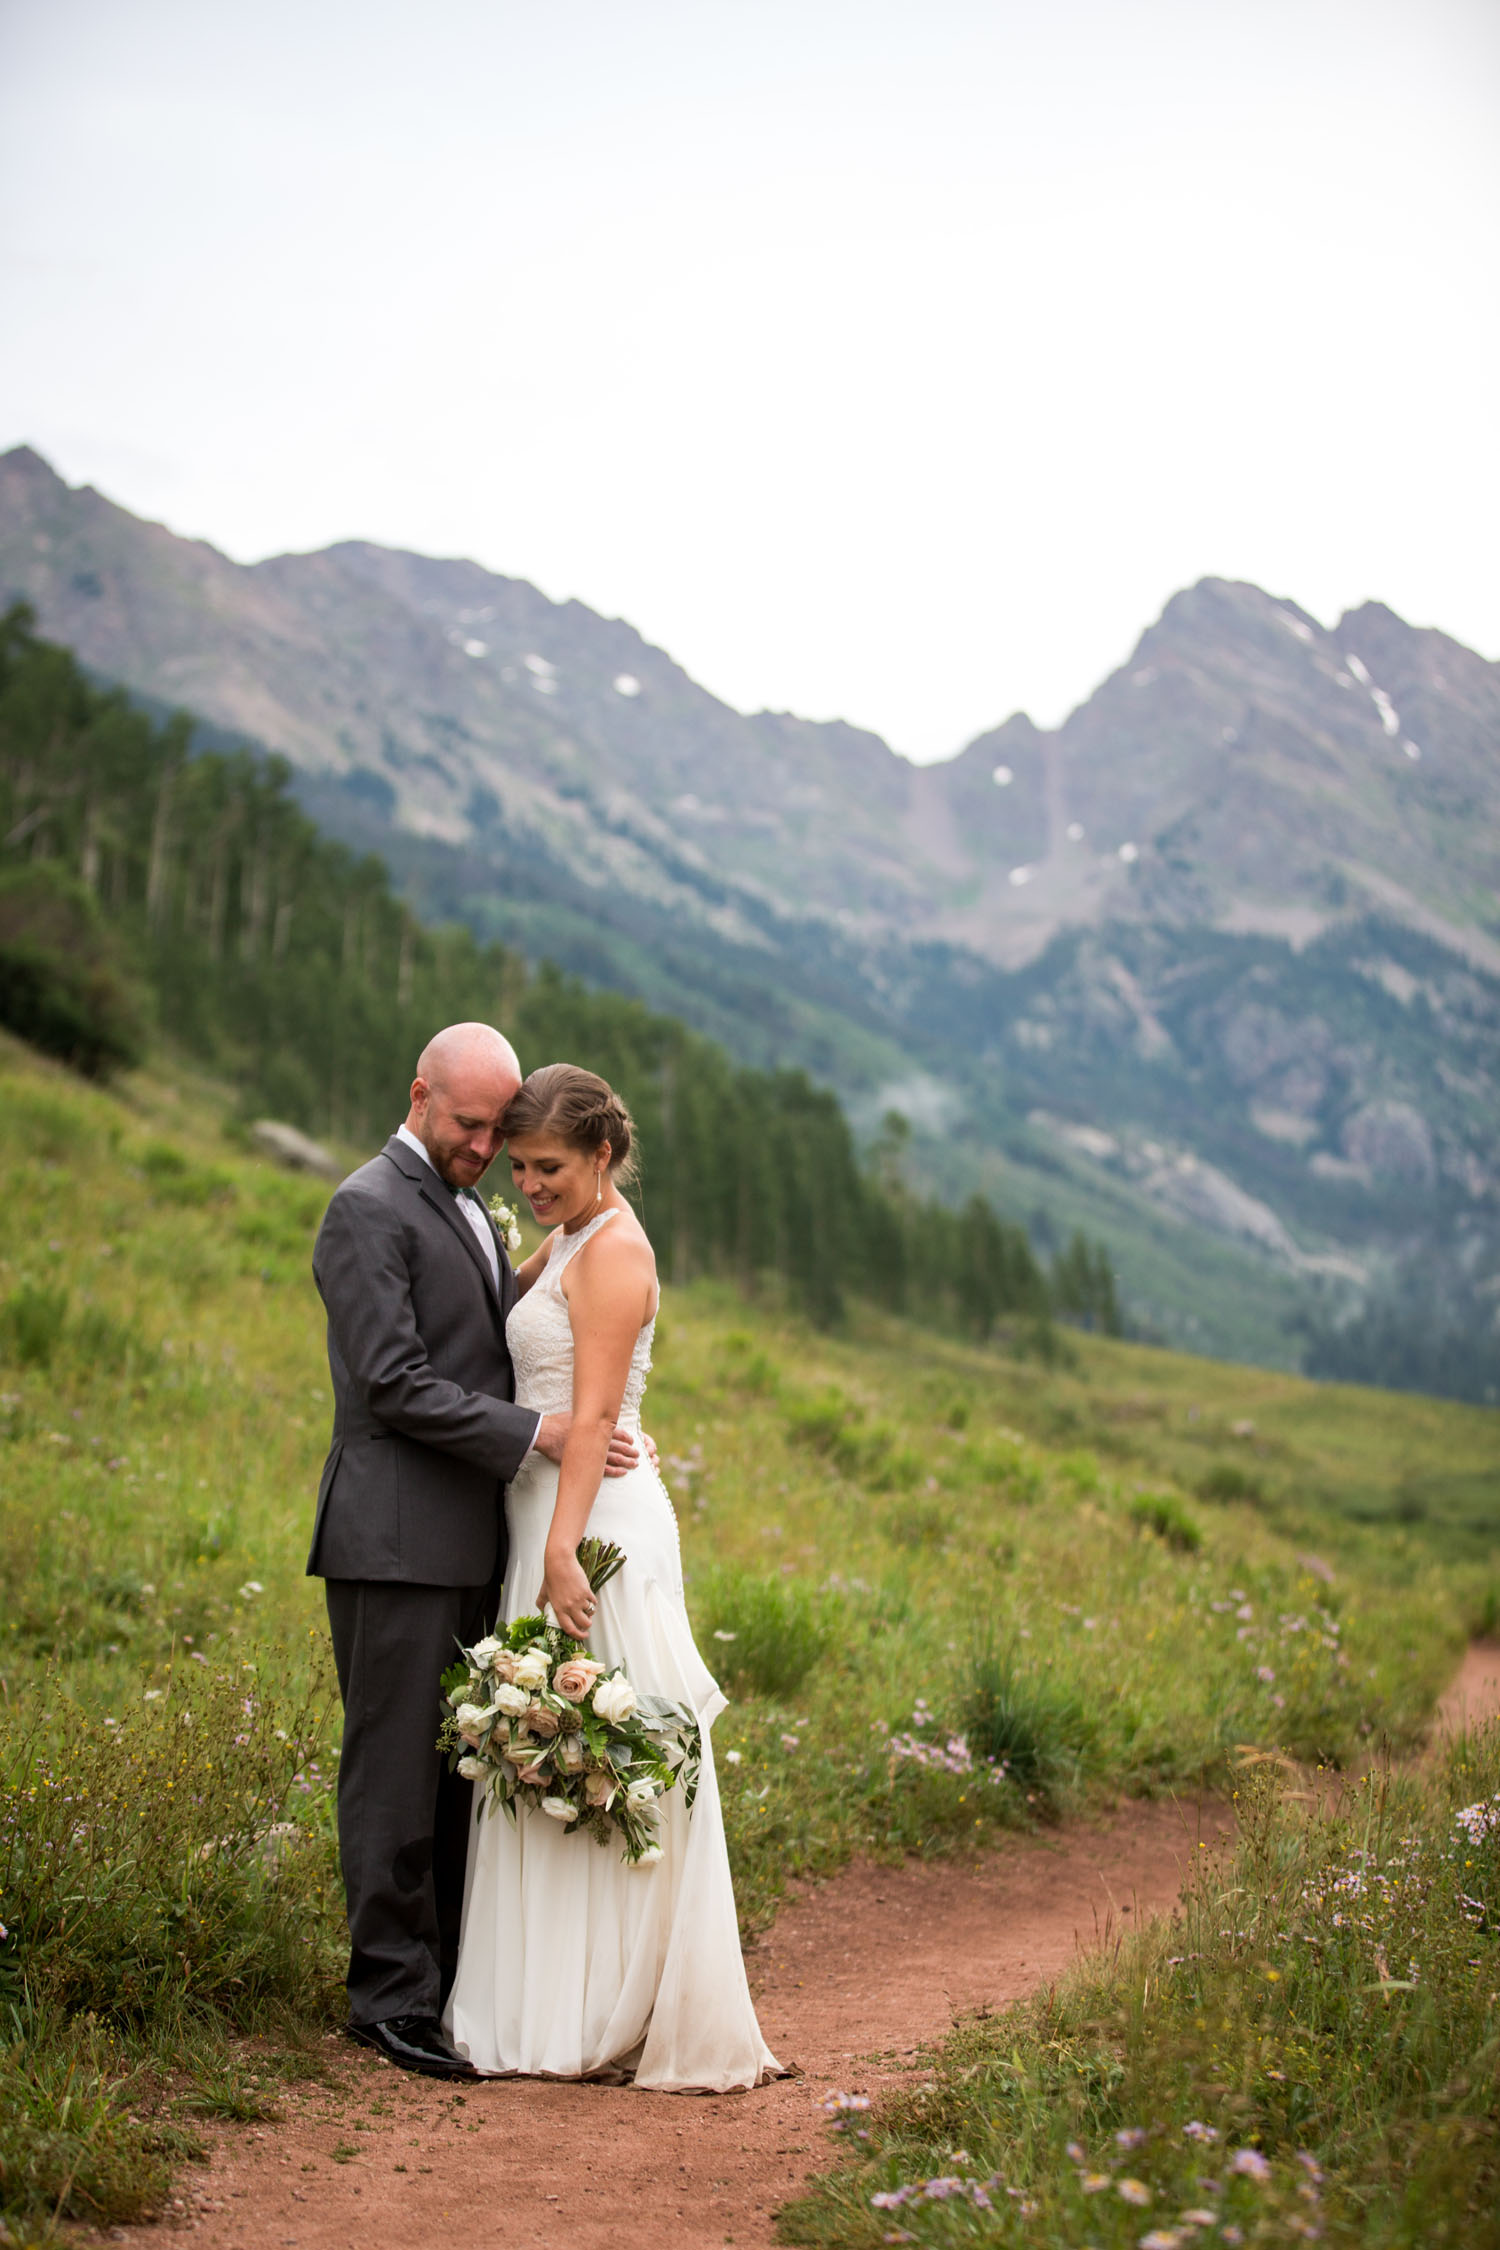 http://www.thestyledsoiree.com/ | Real wedding at piney river ranch | vail colorado wedding location